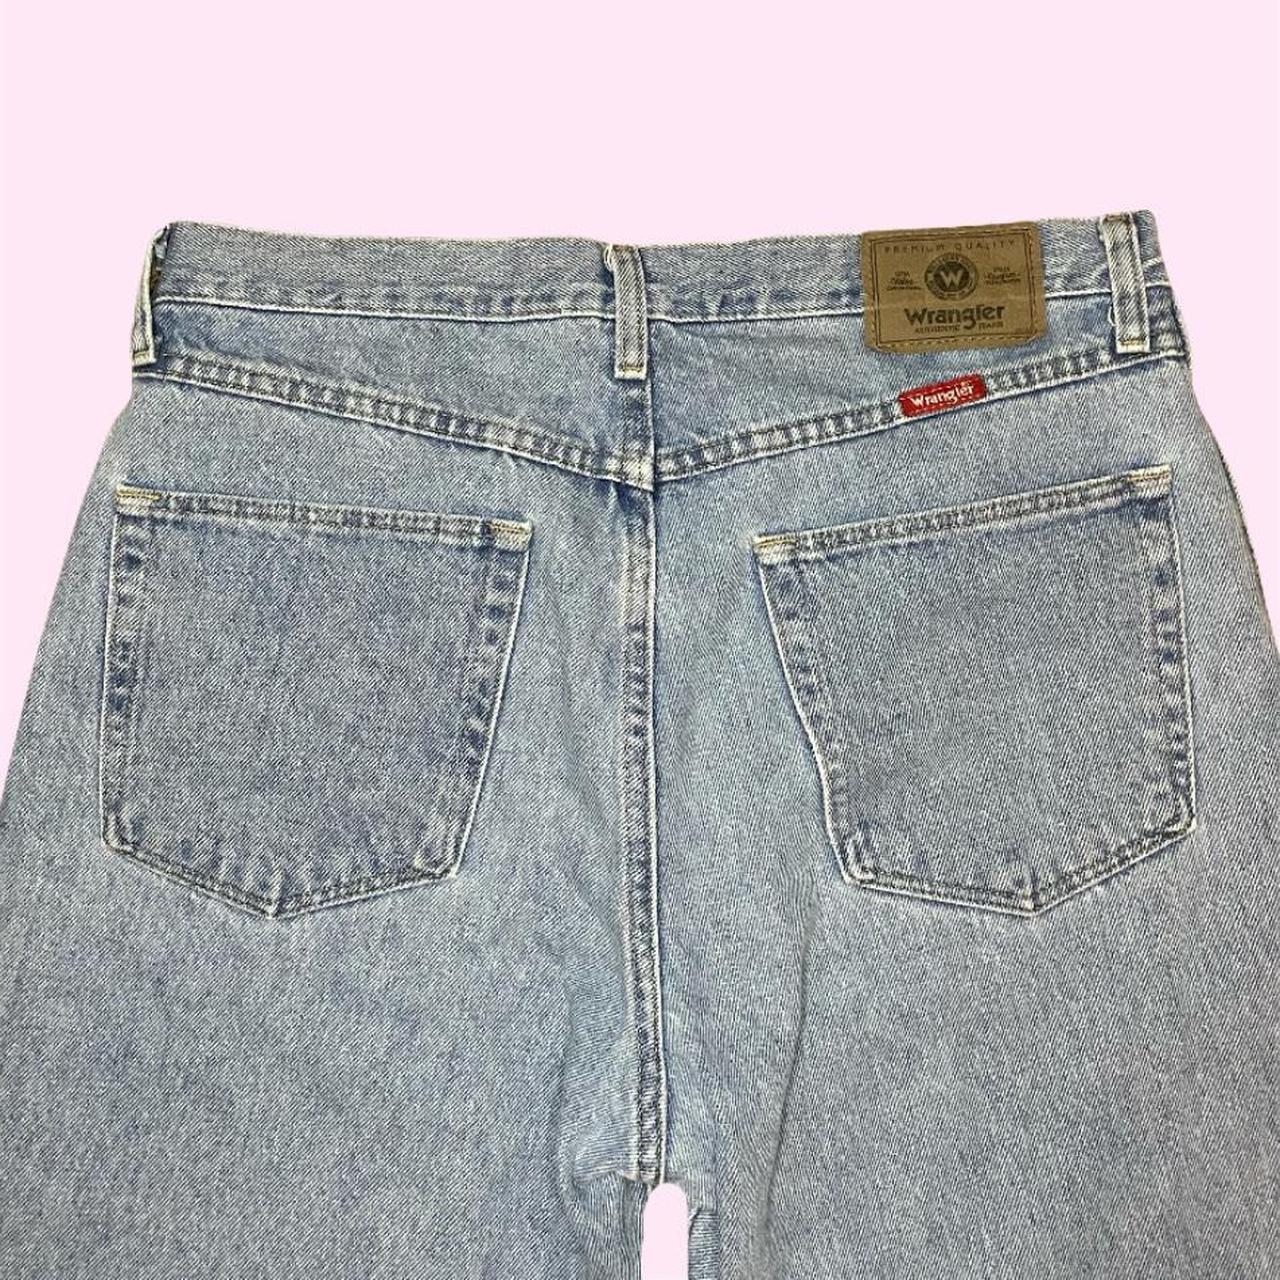 Vintage high waisted wrangler jeans This beautiful... - Depop